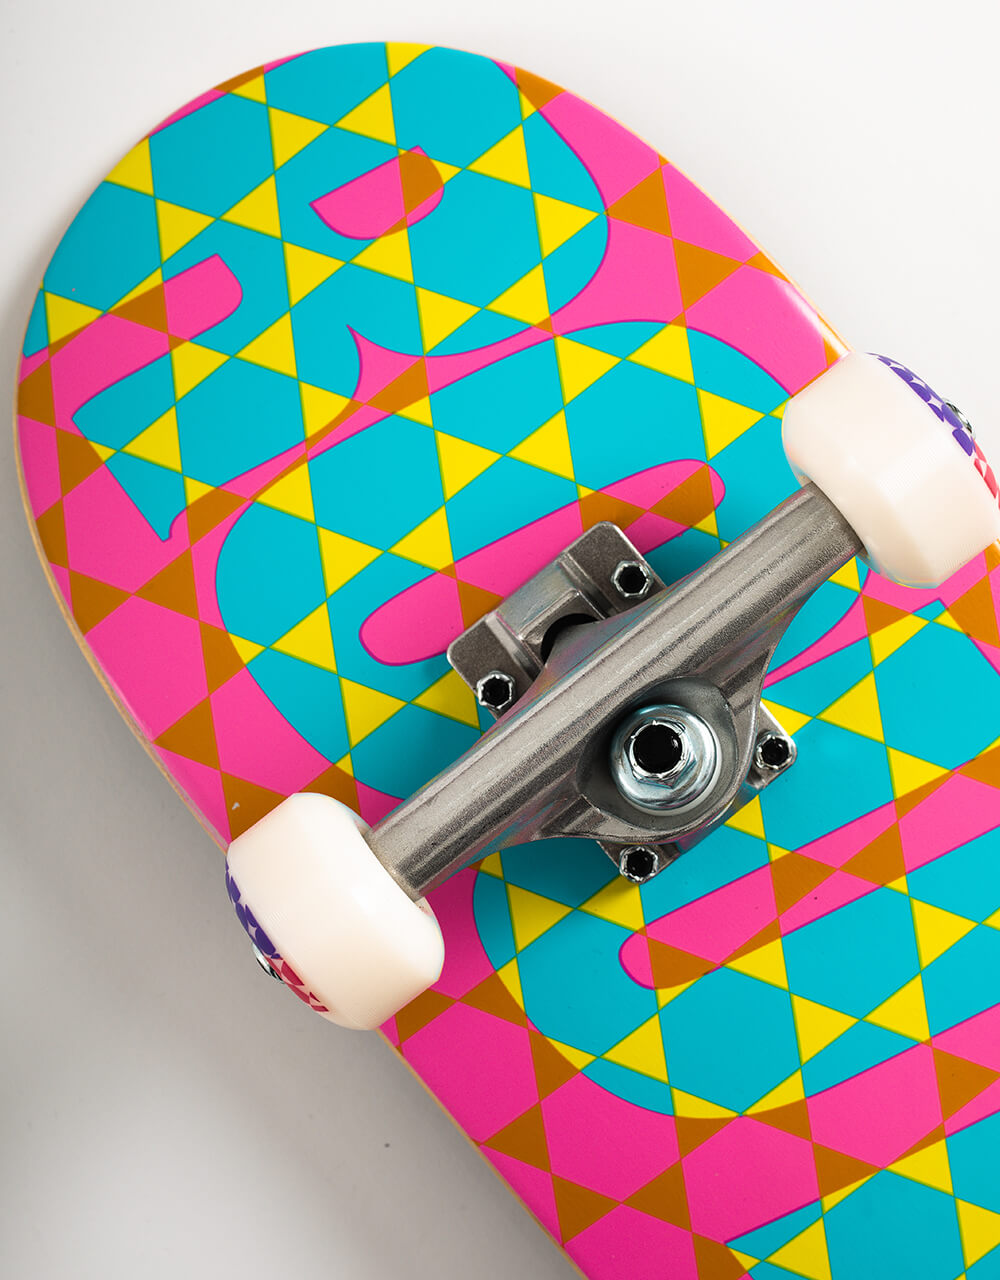 Route One Geometric Complete Skateboard - 7.75"